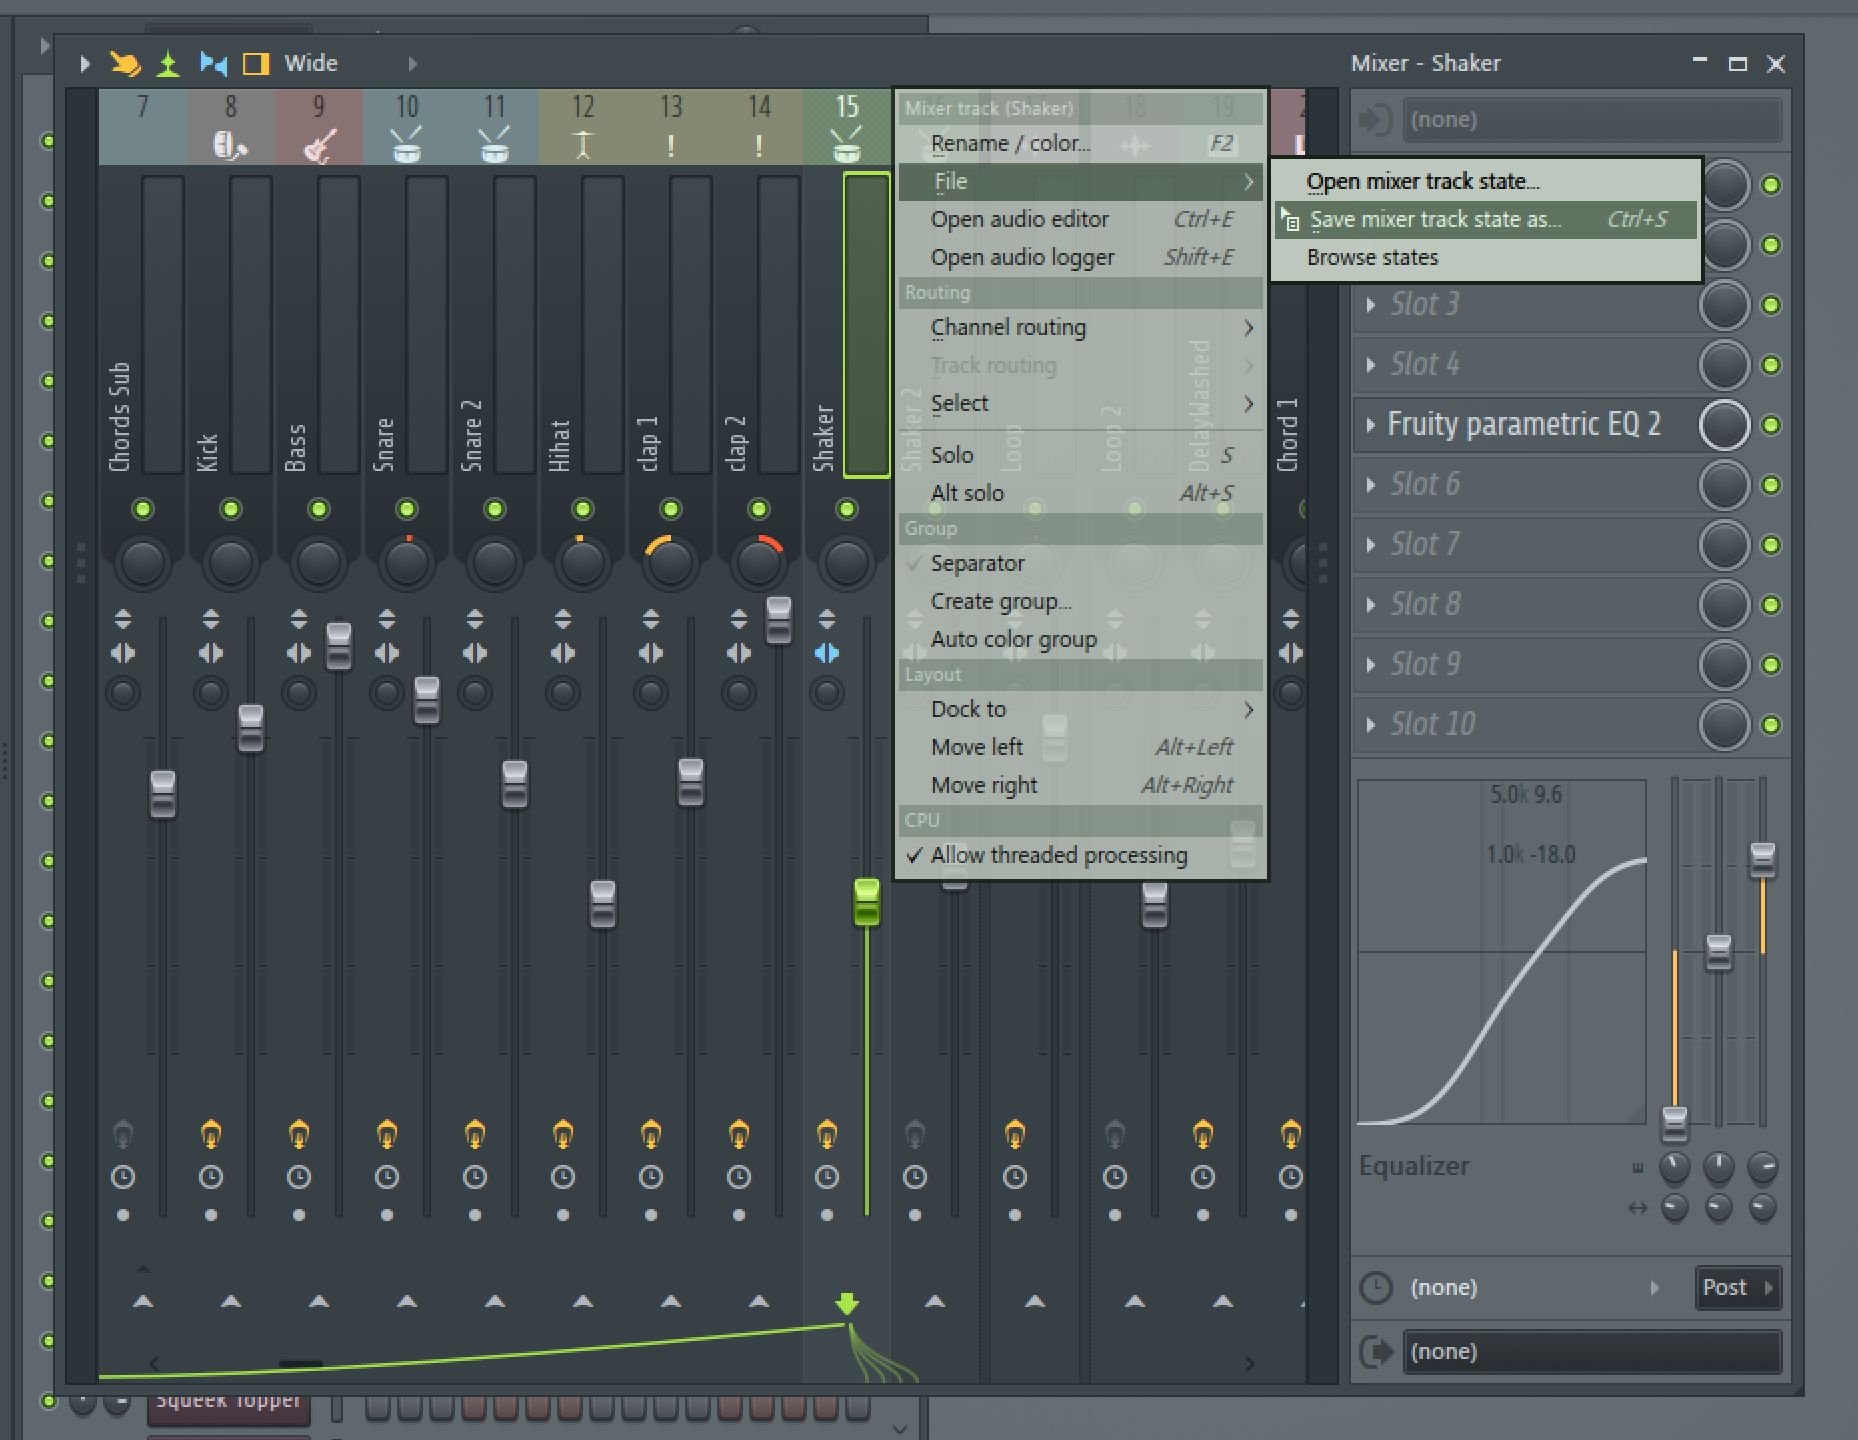 how to mix and master in fl studio